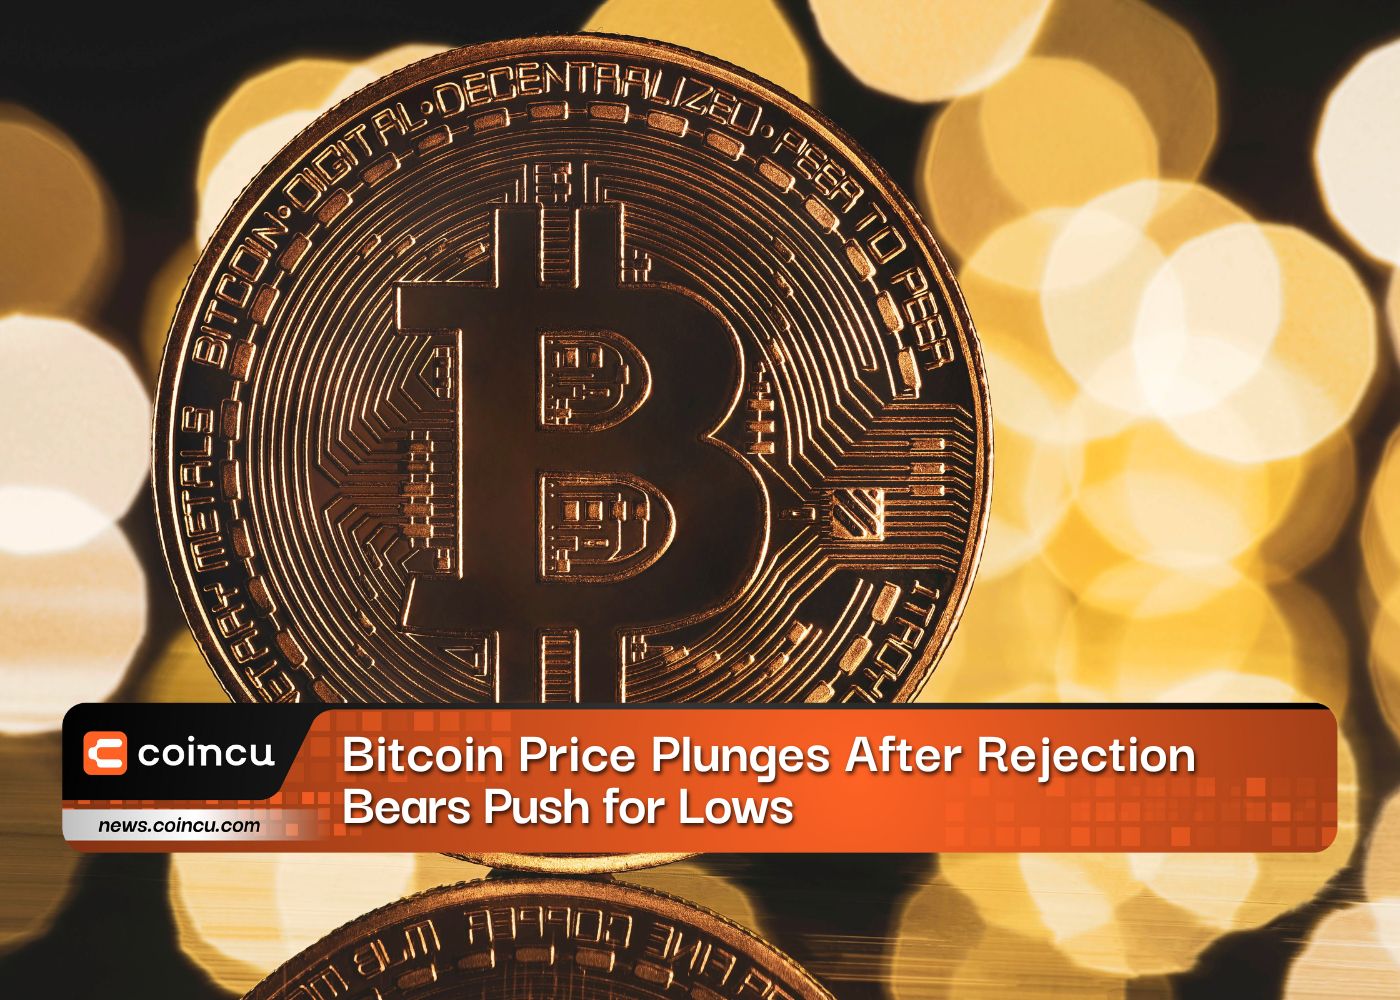 Bitcoin Price Plunges After Rejection